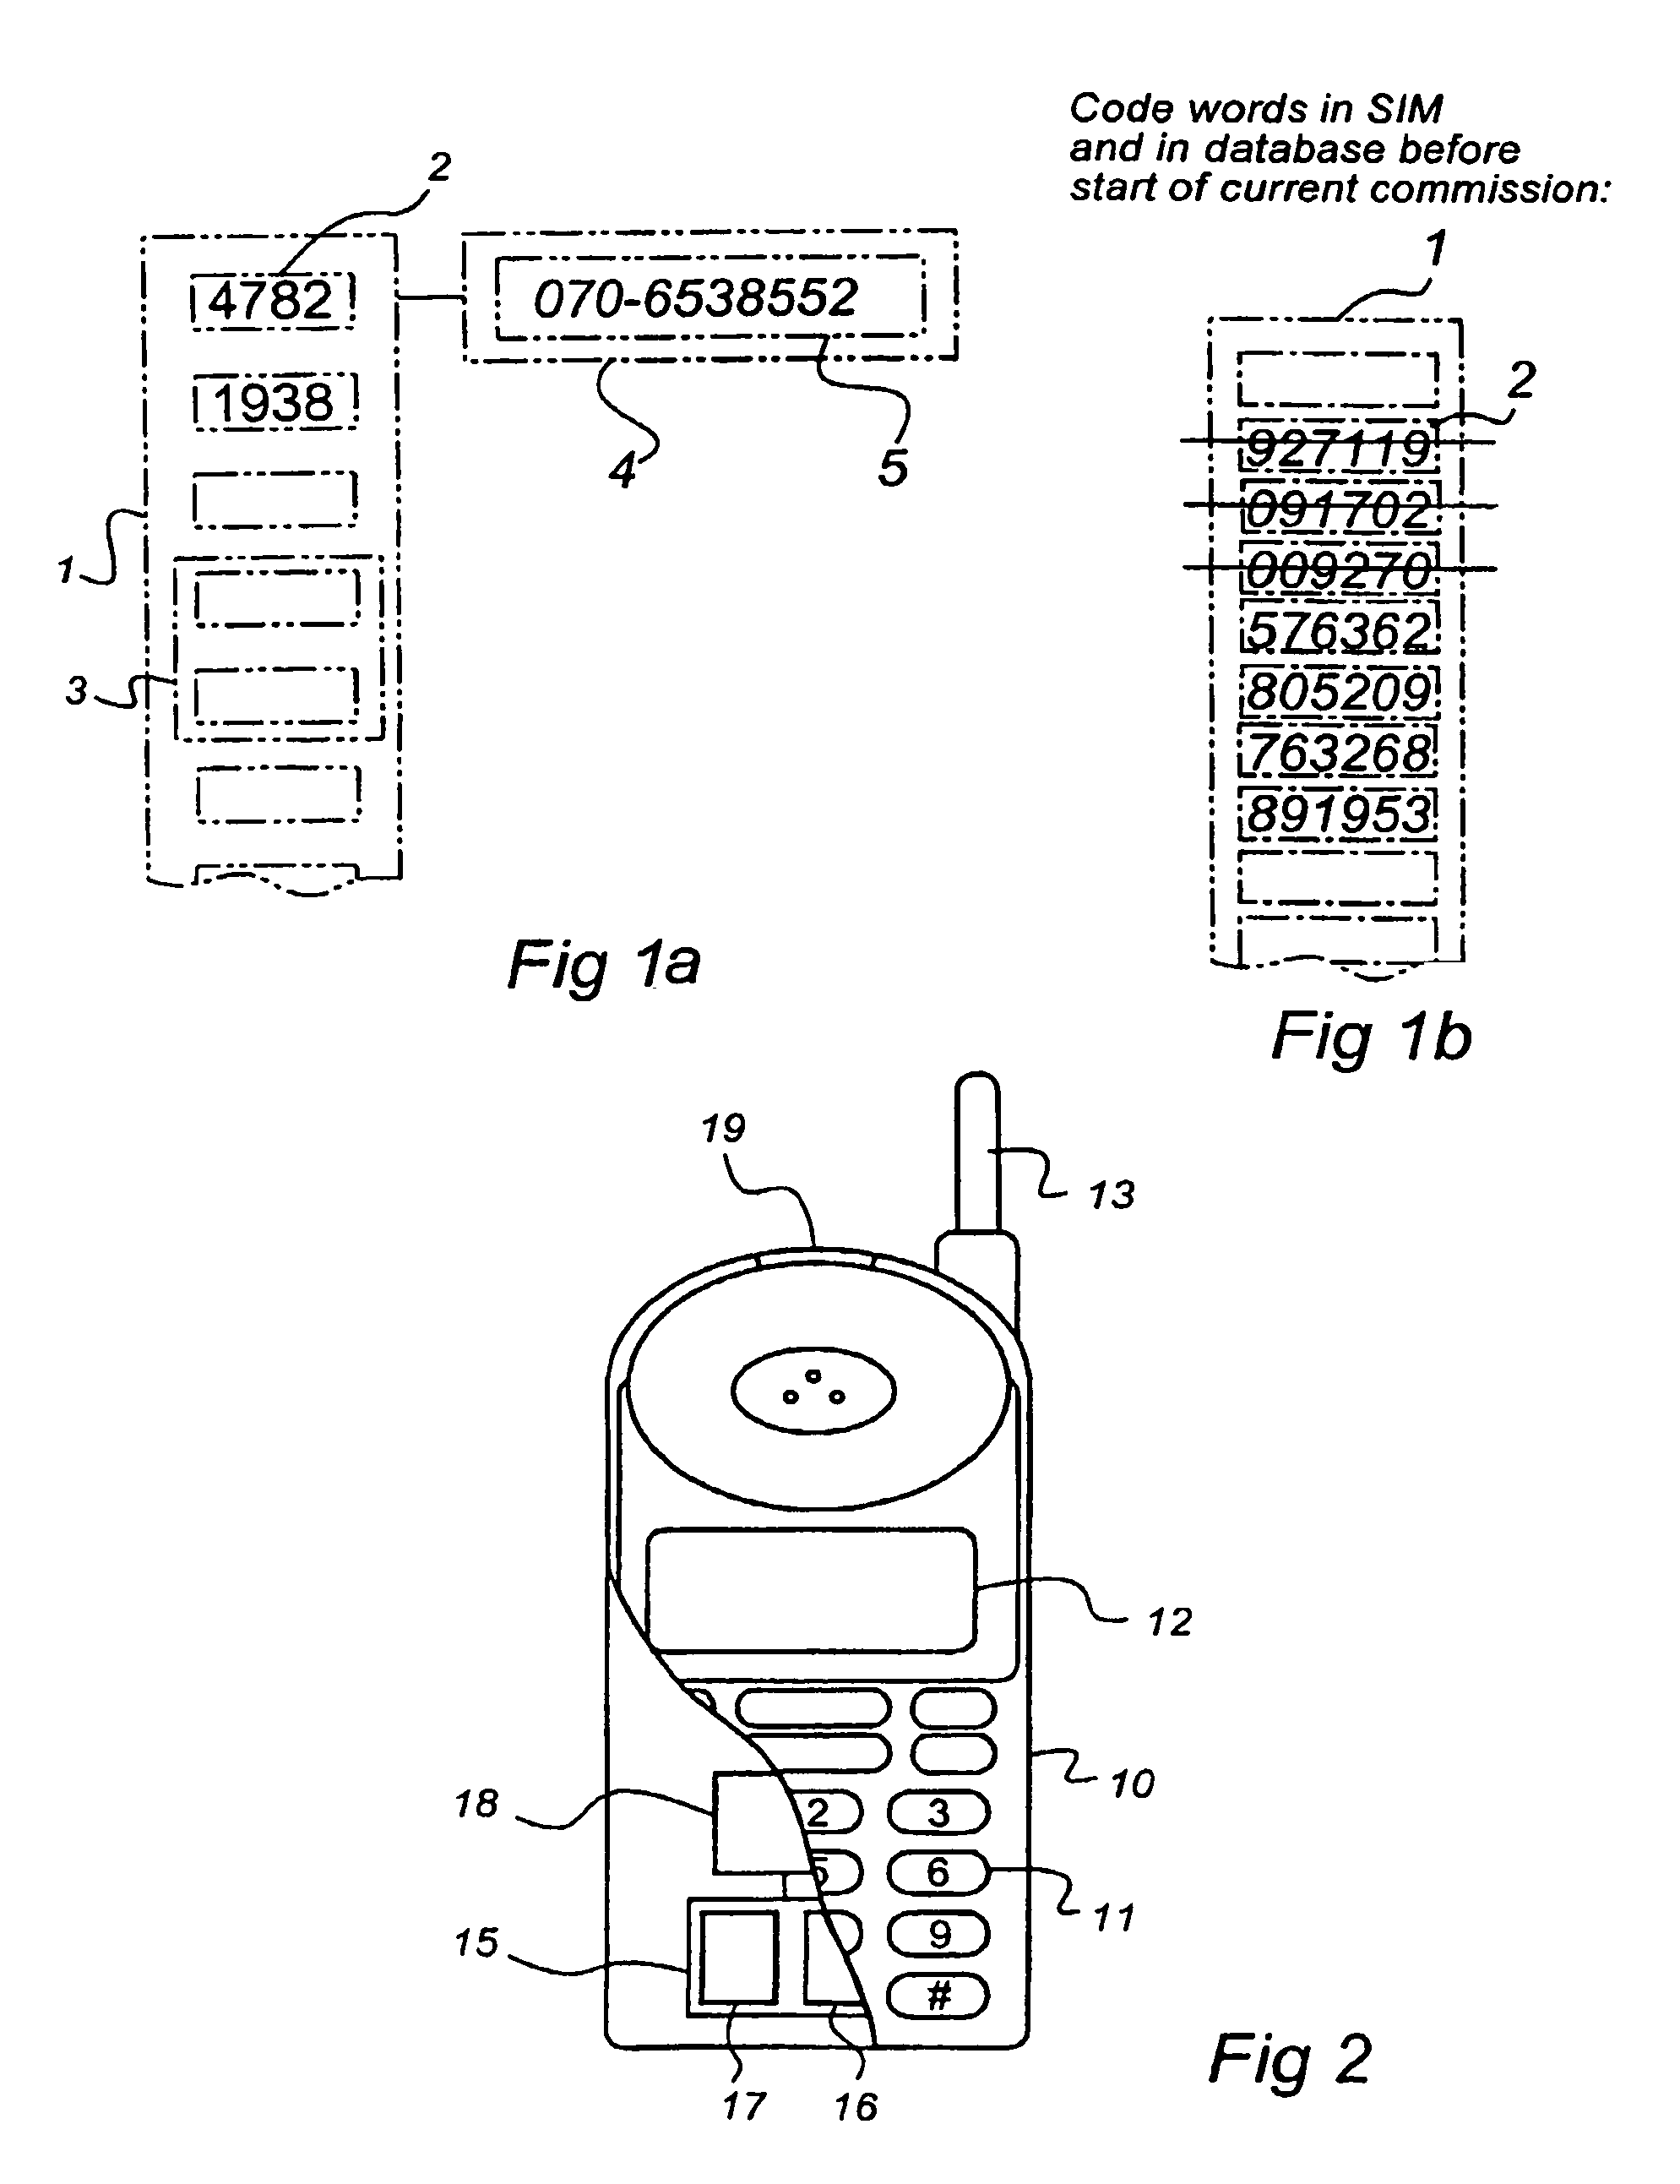 Method and system for authentication of a service request